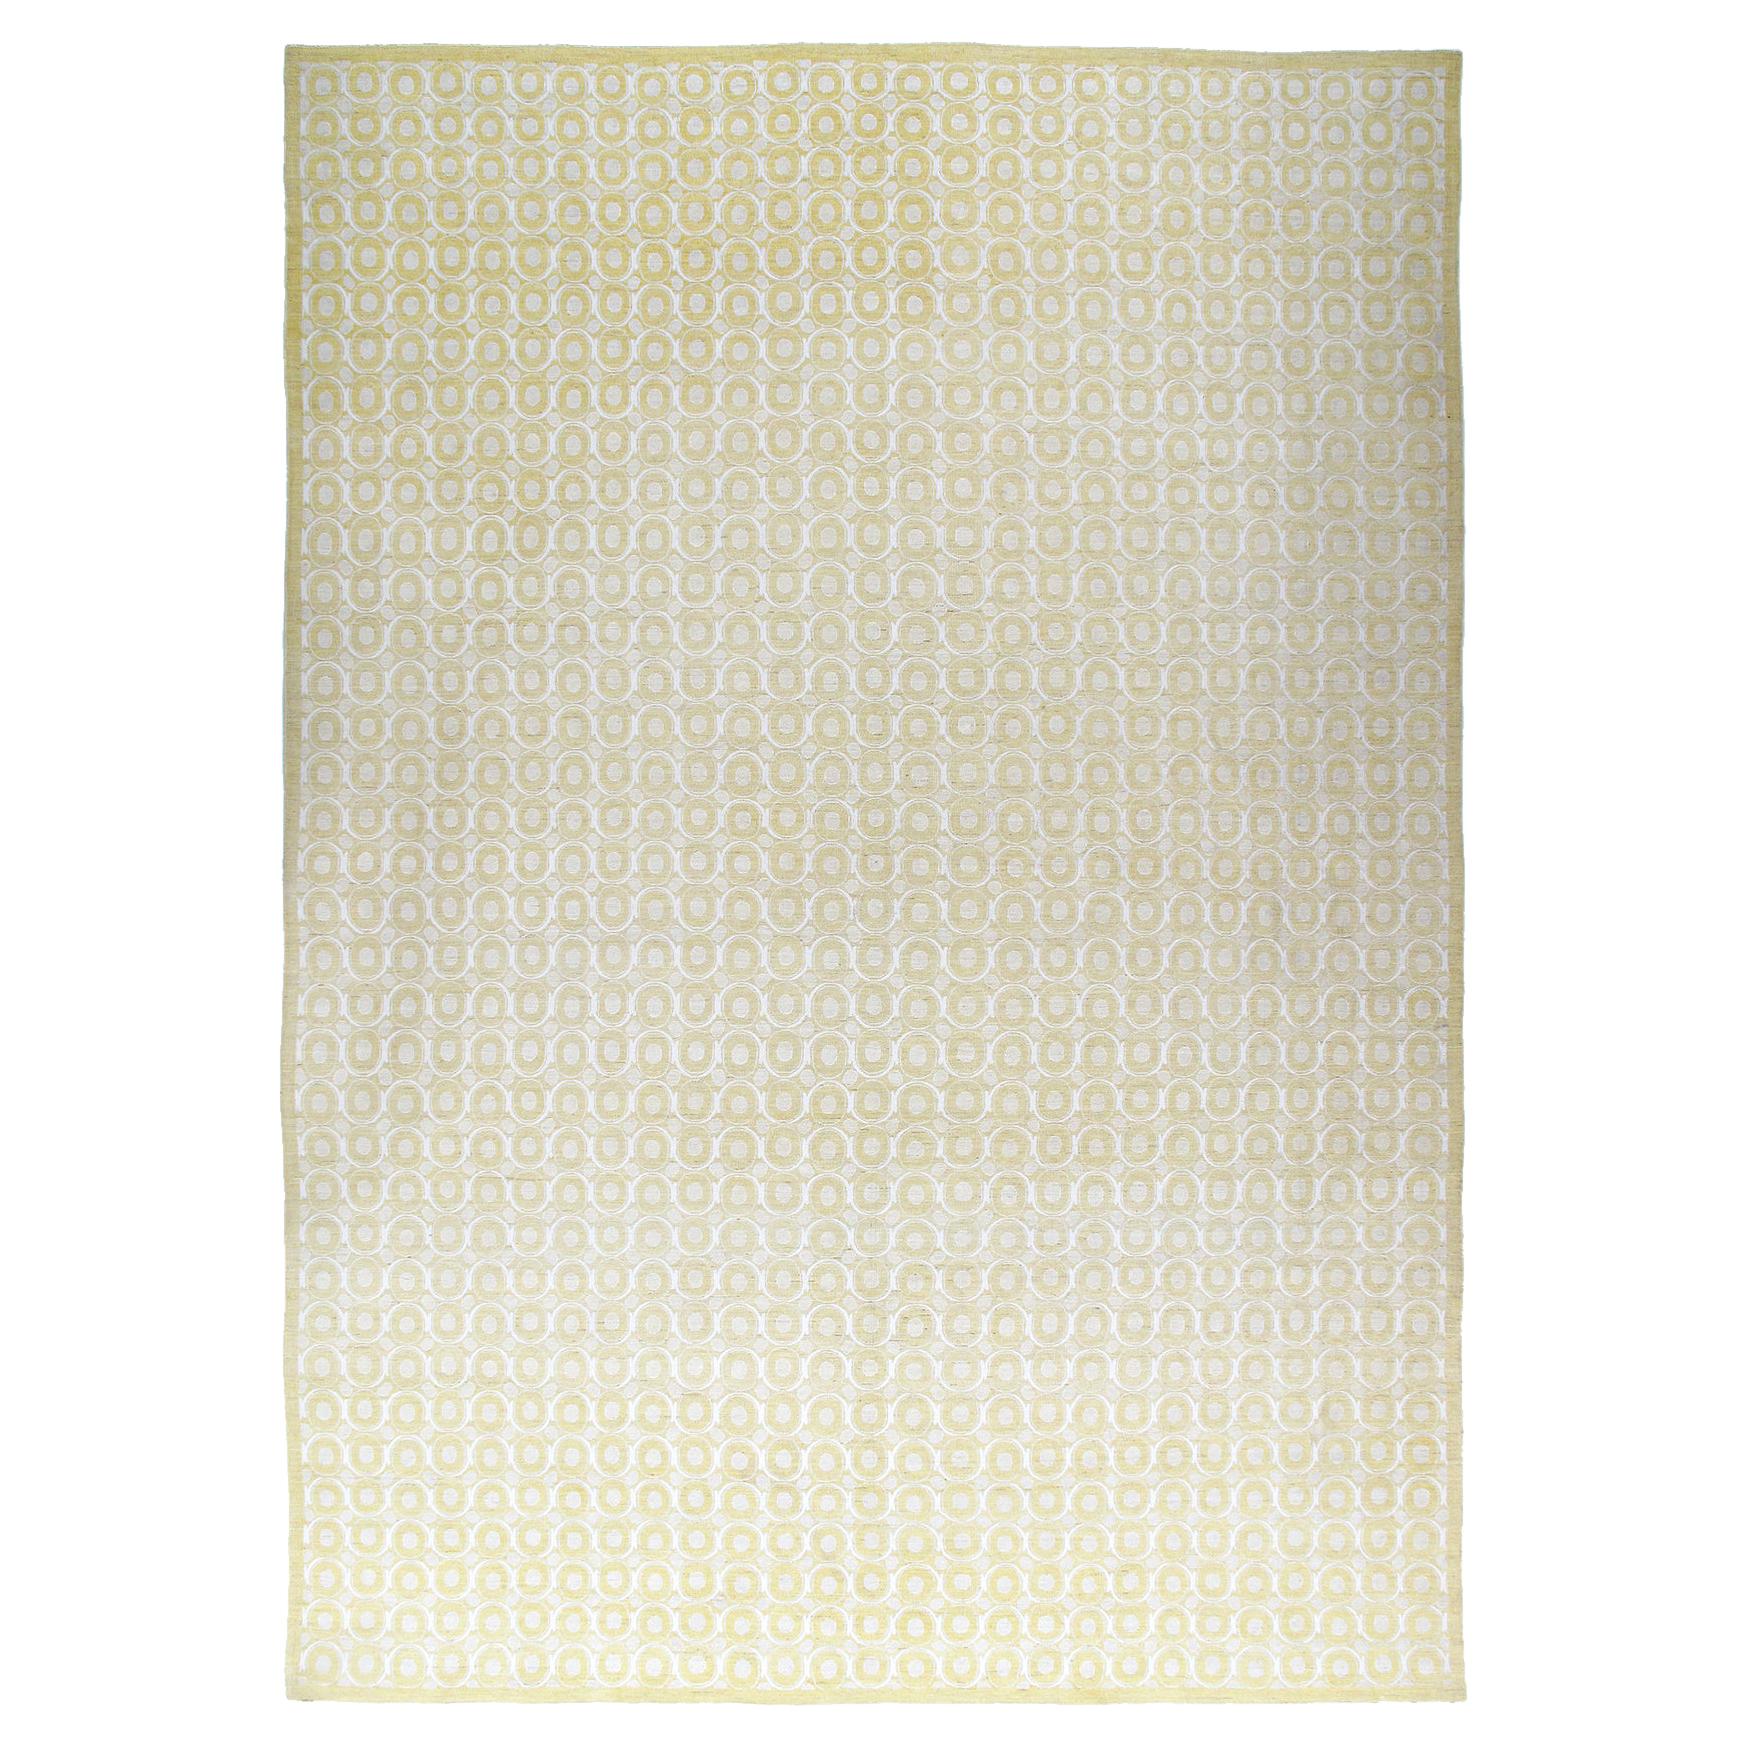 Decorative Modern Handknotted Rug with a Subtle, Geometric Pattern For Sale